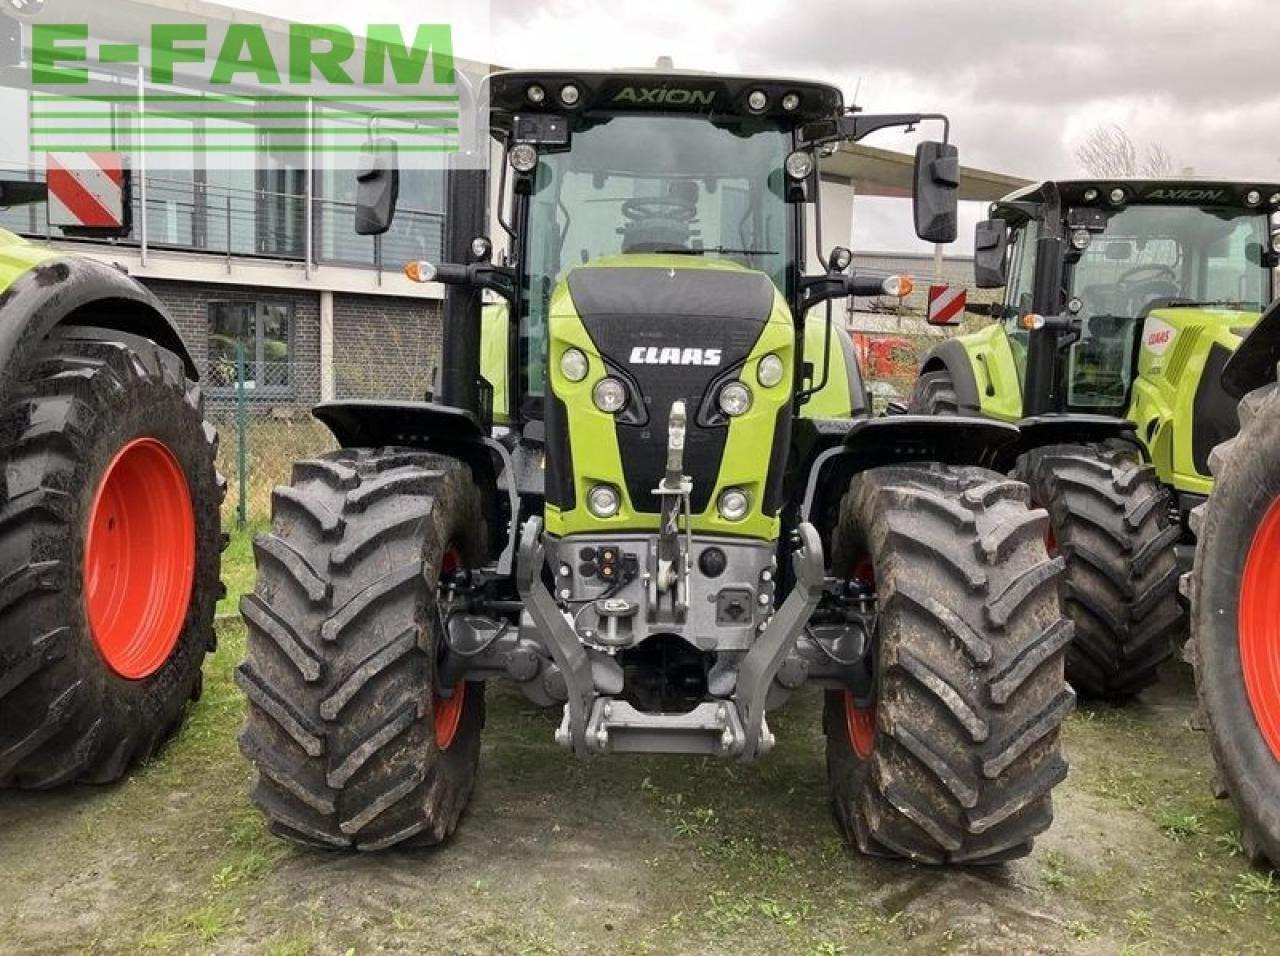 Tractor CLAAS axion 800 hexashift - stage v cis+